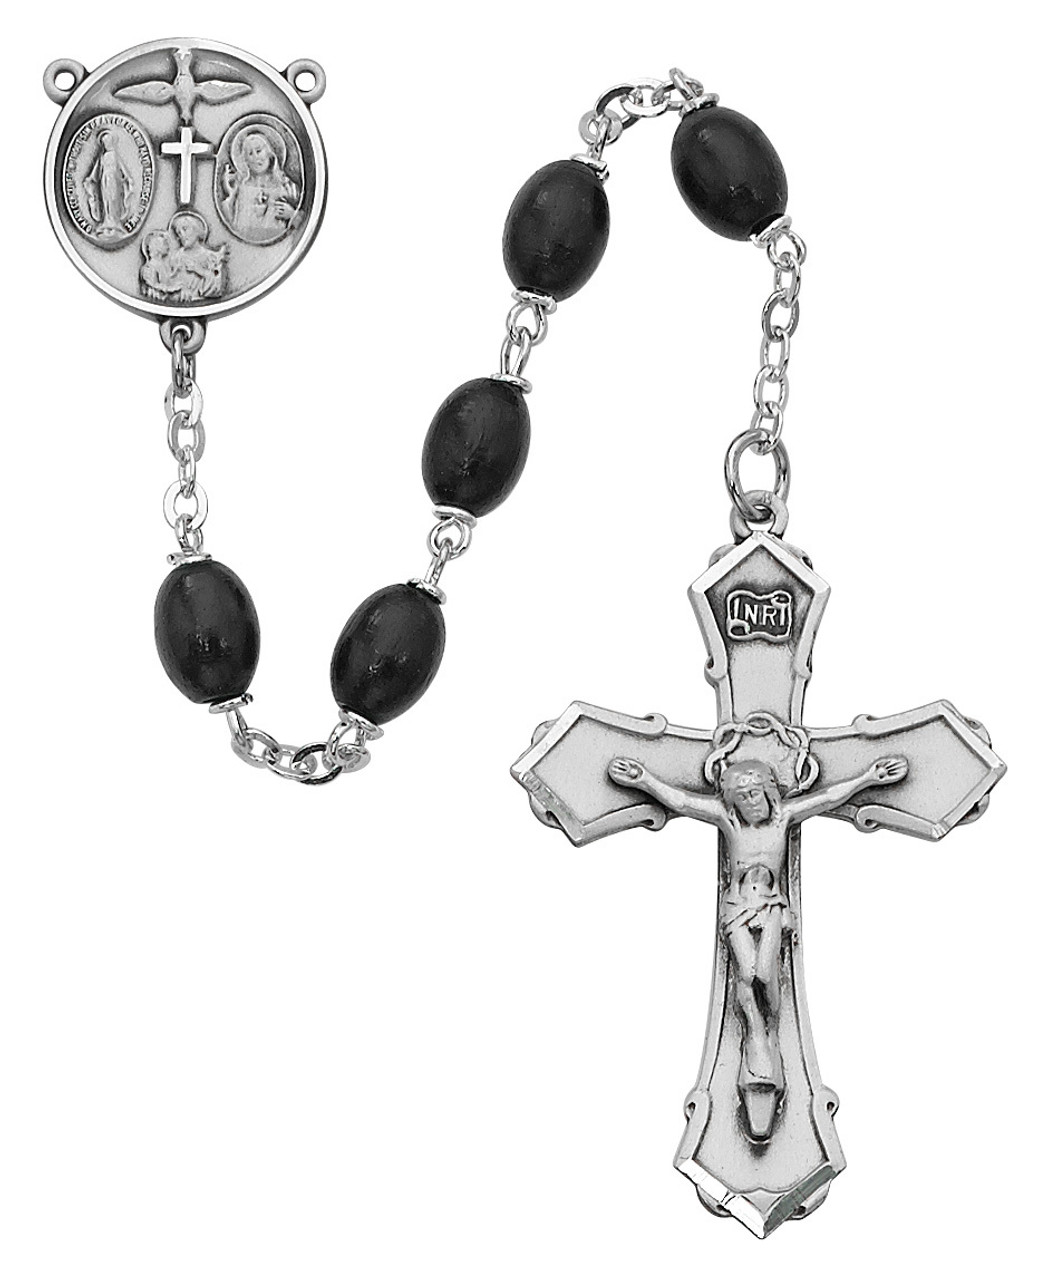 Silver Plate Rosary features 8mm Hematite beads The Crucifix measures 1 3/4 x 1 Apollonia medal The centerpiece features a St Patron Saint Dental Diseases 